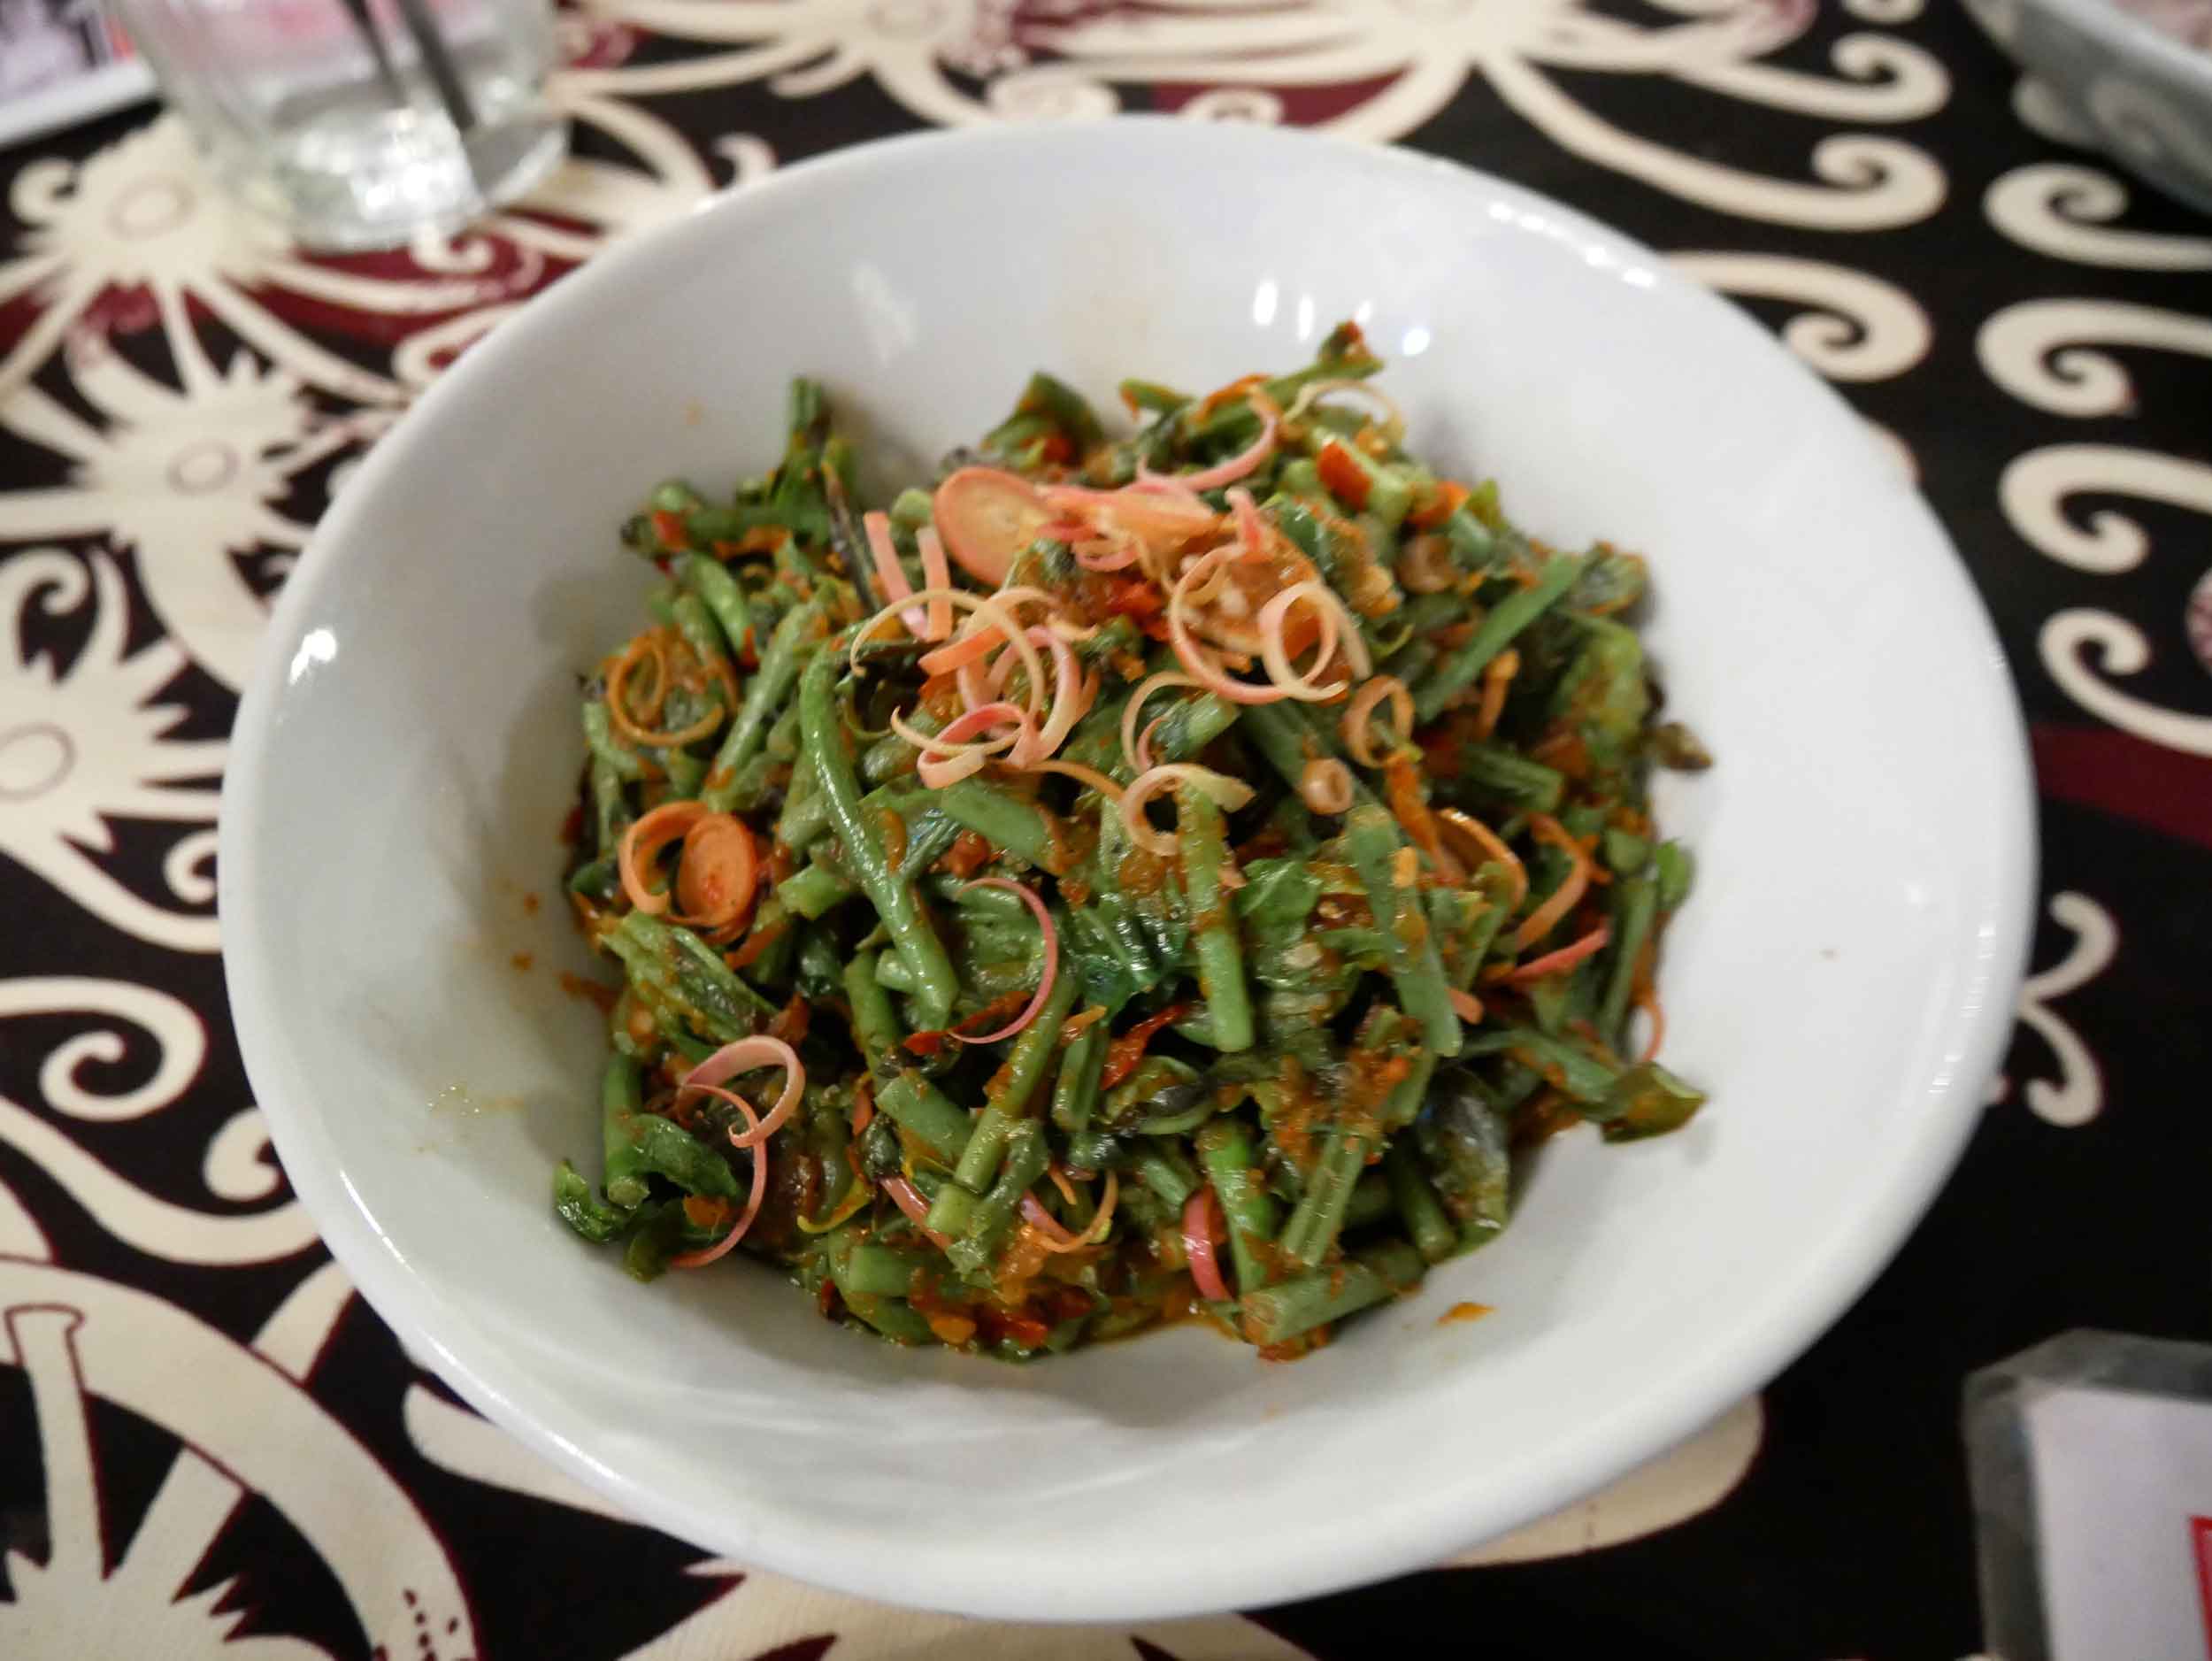  Spicy and bitter, the  stir fried fiddlehead ferns &nbsp;at The Dyak were a Malay take on the now trendy dish.&nbsp; 